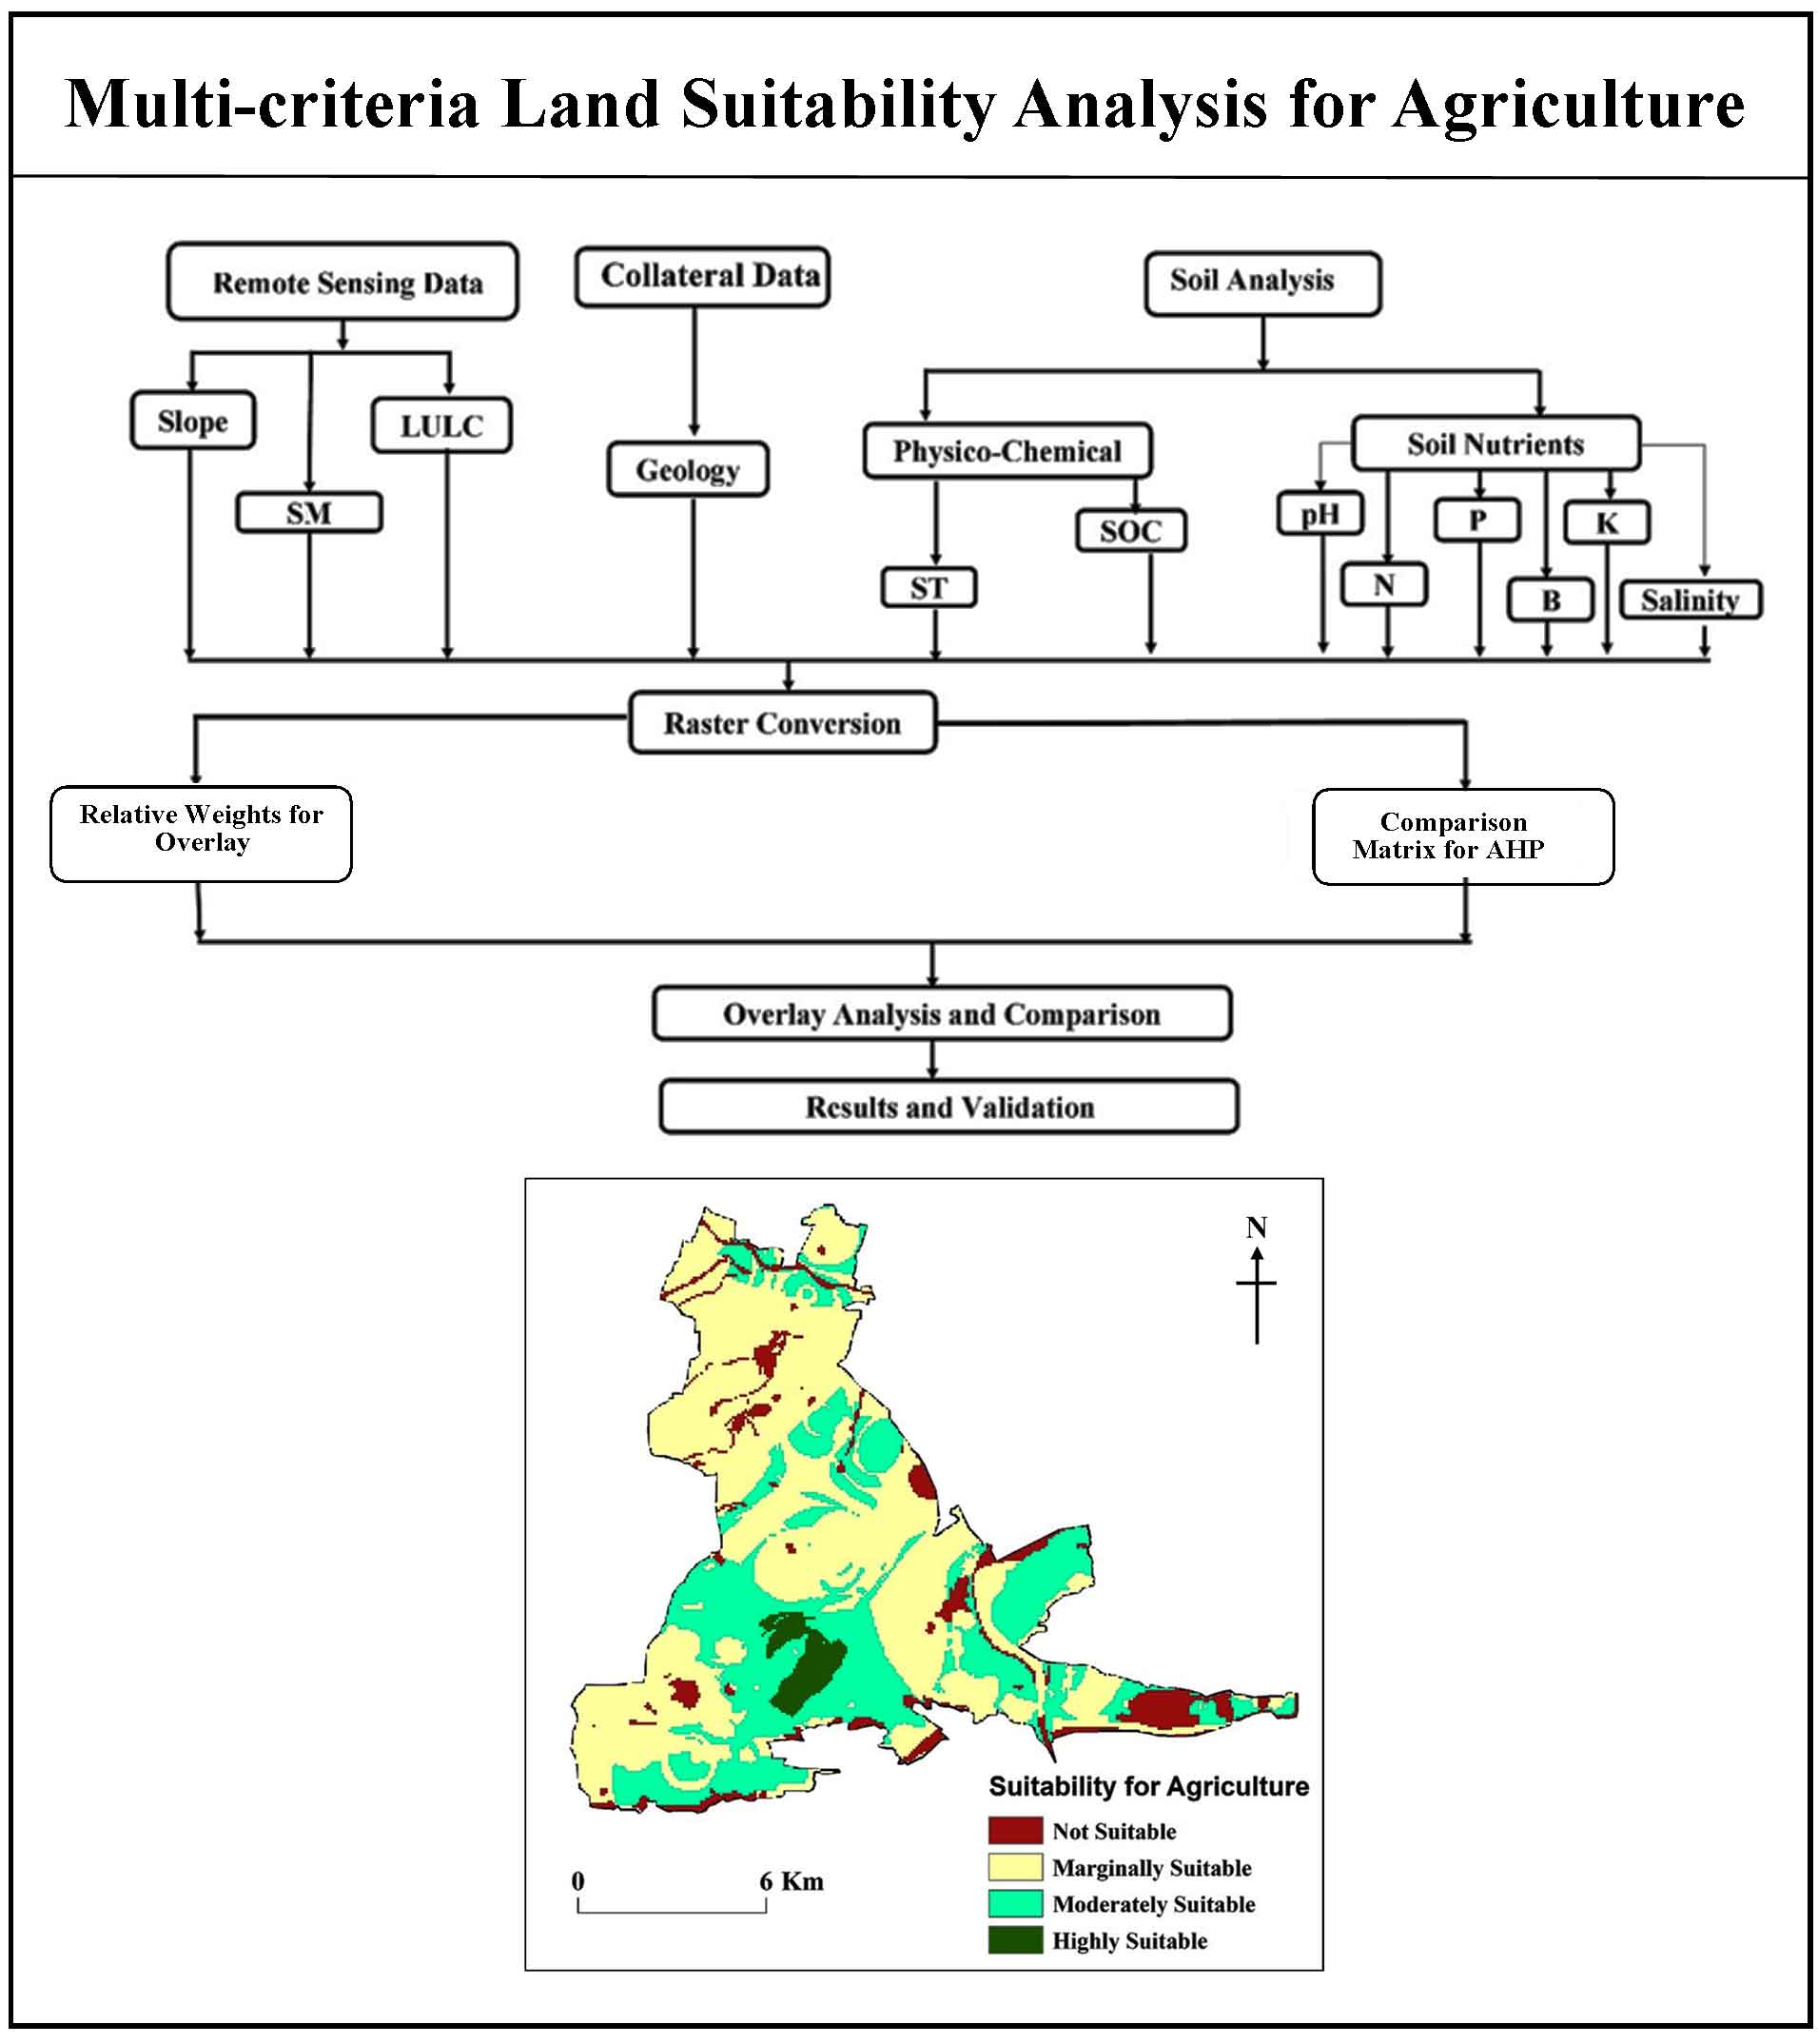 Multi-criteria Land Suitability Analysis for Agriculture in Semi-Arid Region of Kadapa District, Southern India: Geospatial Approaches